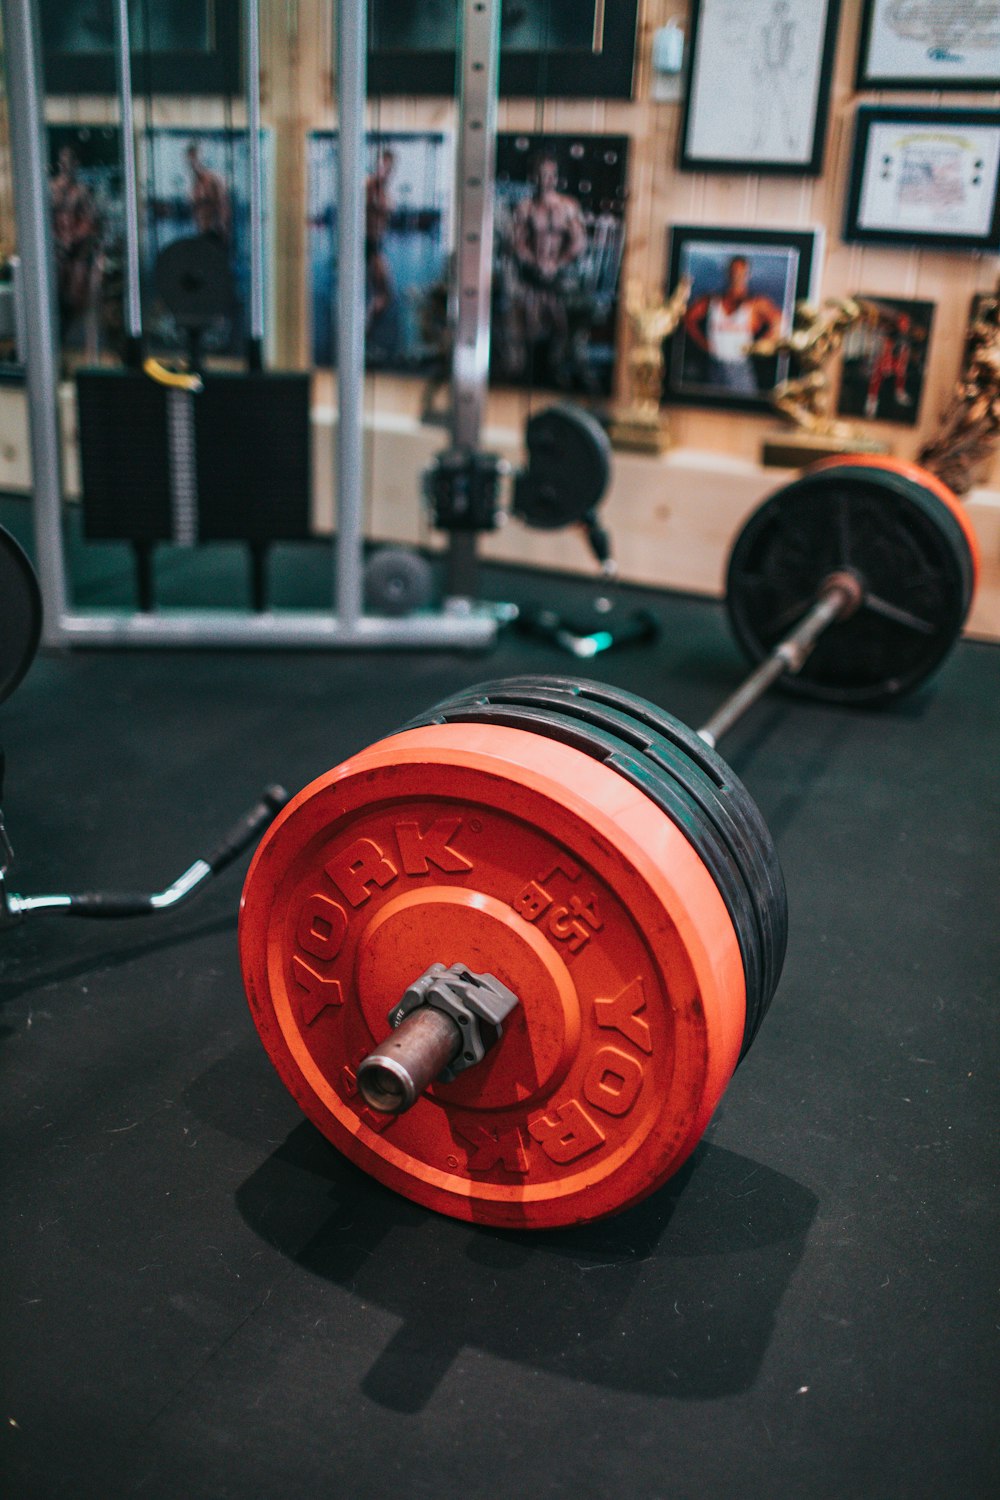 Gyms Pictures | Download Free Images on Unsplash